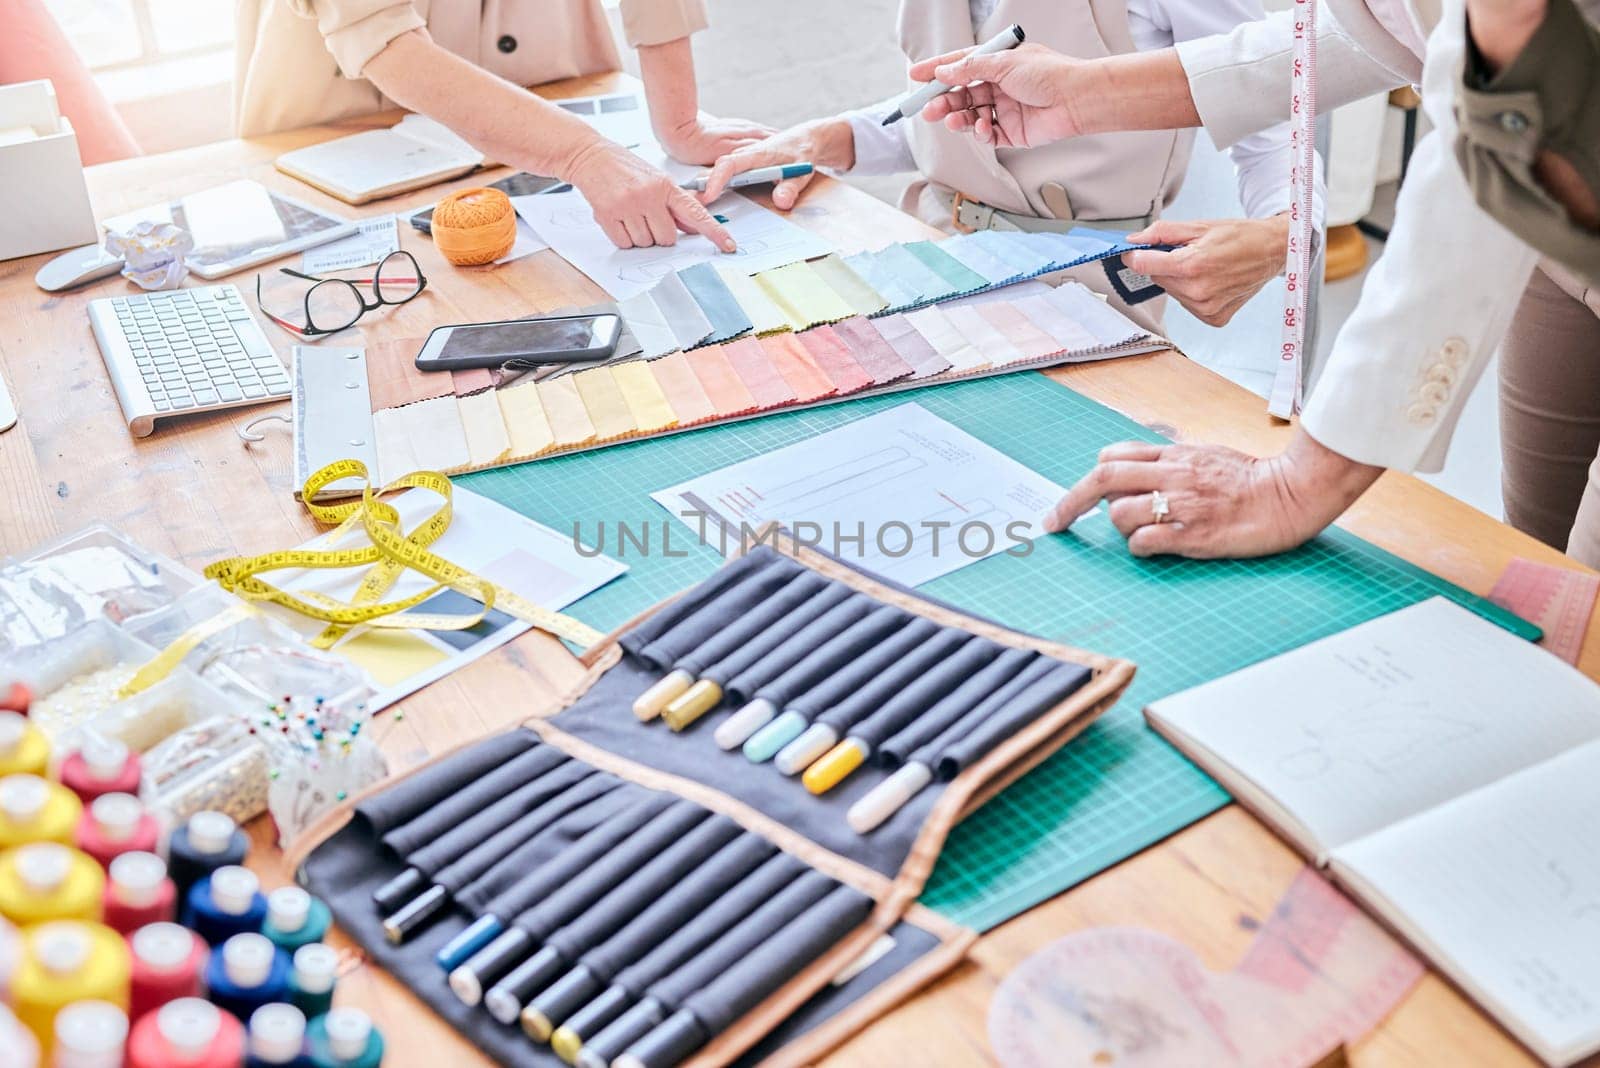 Planning, teamwork and fashion designer hands in creative project, collaboration and textile industry. Startup, sketch and studio, workshop or manufacturing people ideas, art vision and color palette.